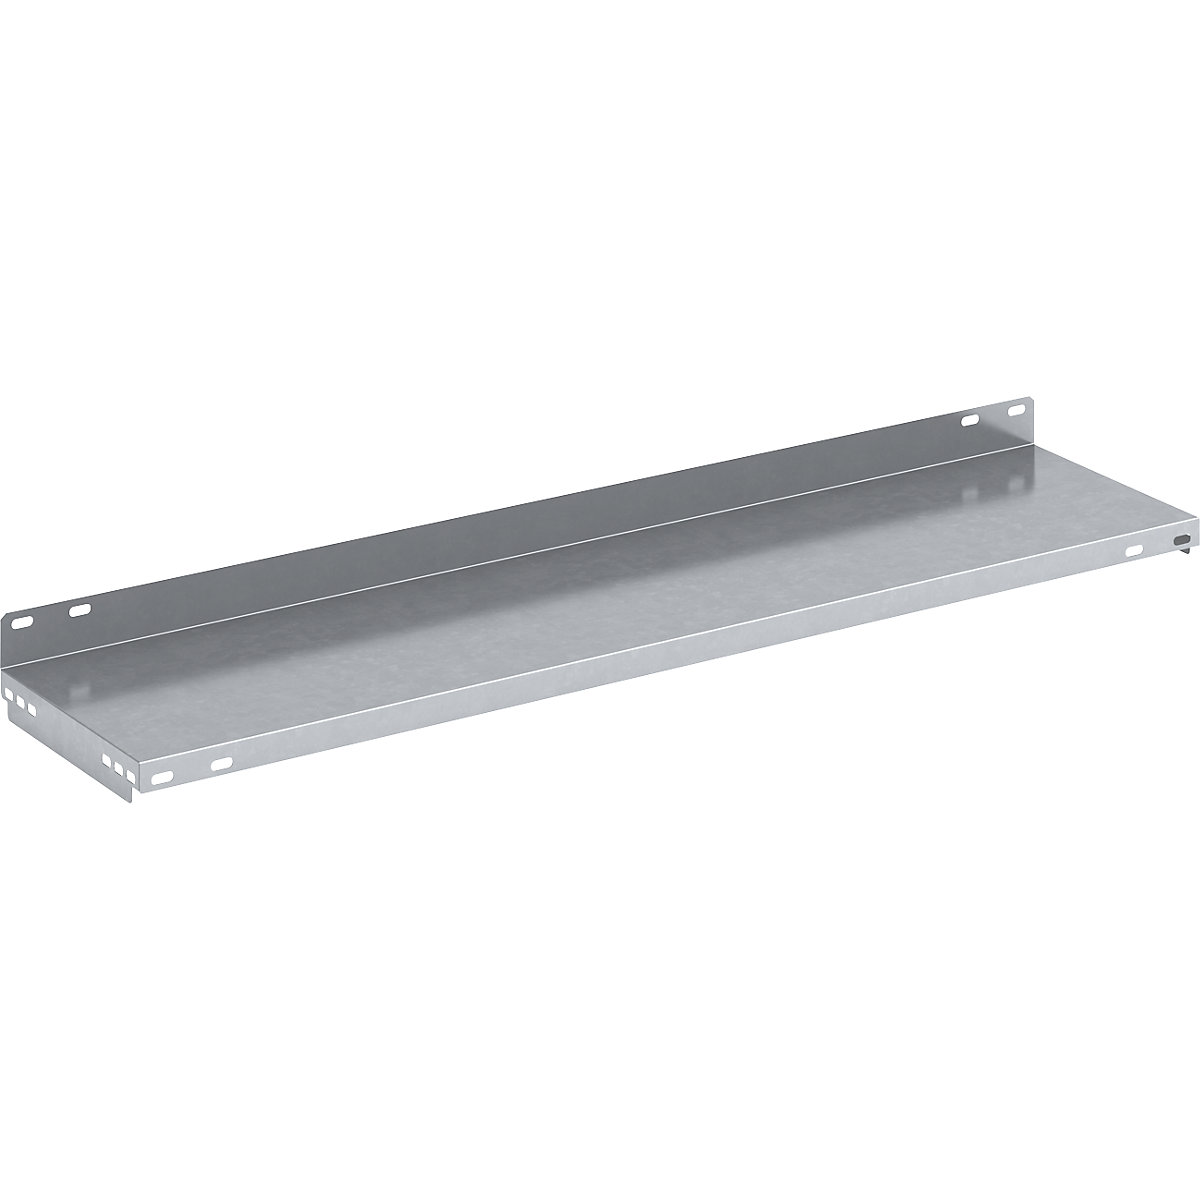 Shelf with supports – hofe, zinc plated, WxD 1000 x 300 mm-1